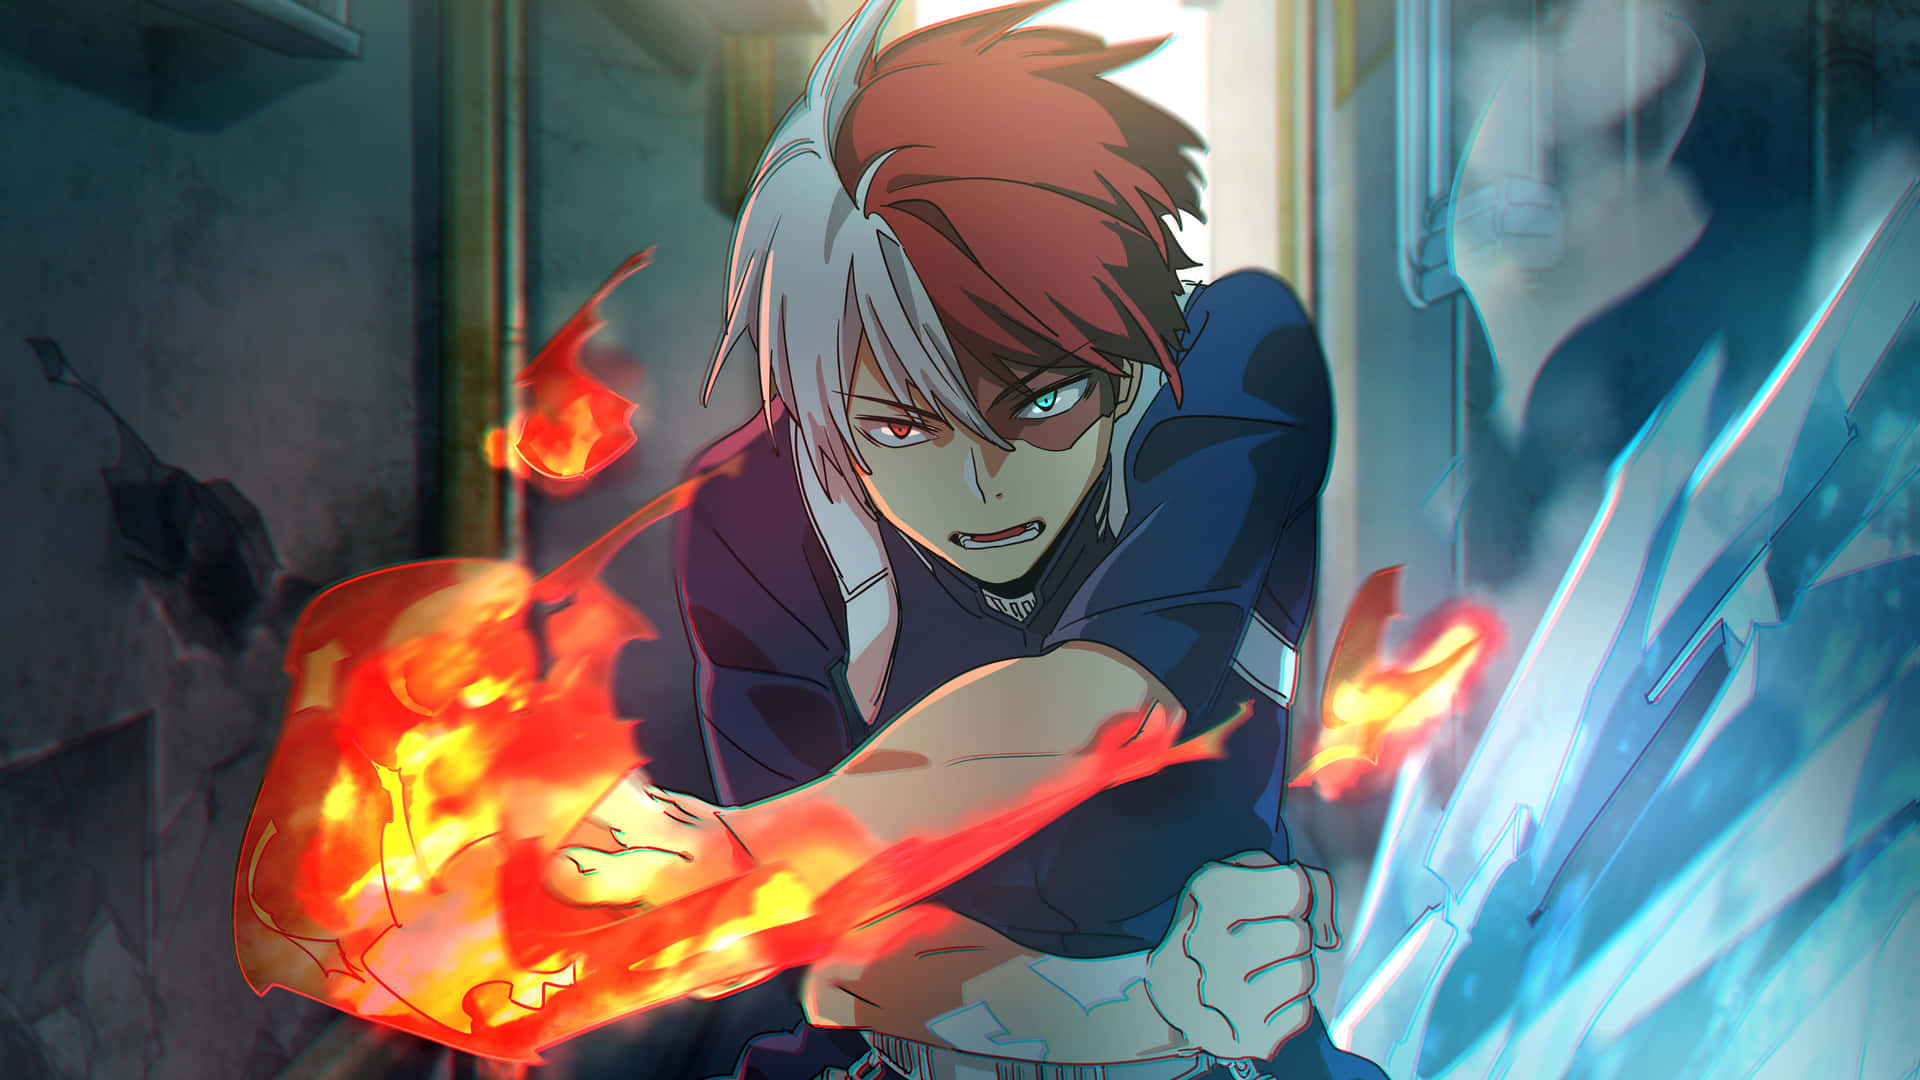 Shoto Todoroki gracing your screen with a burst of passionate fire and ice